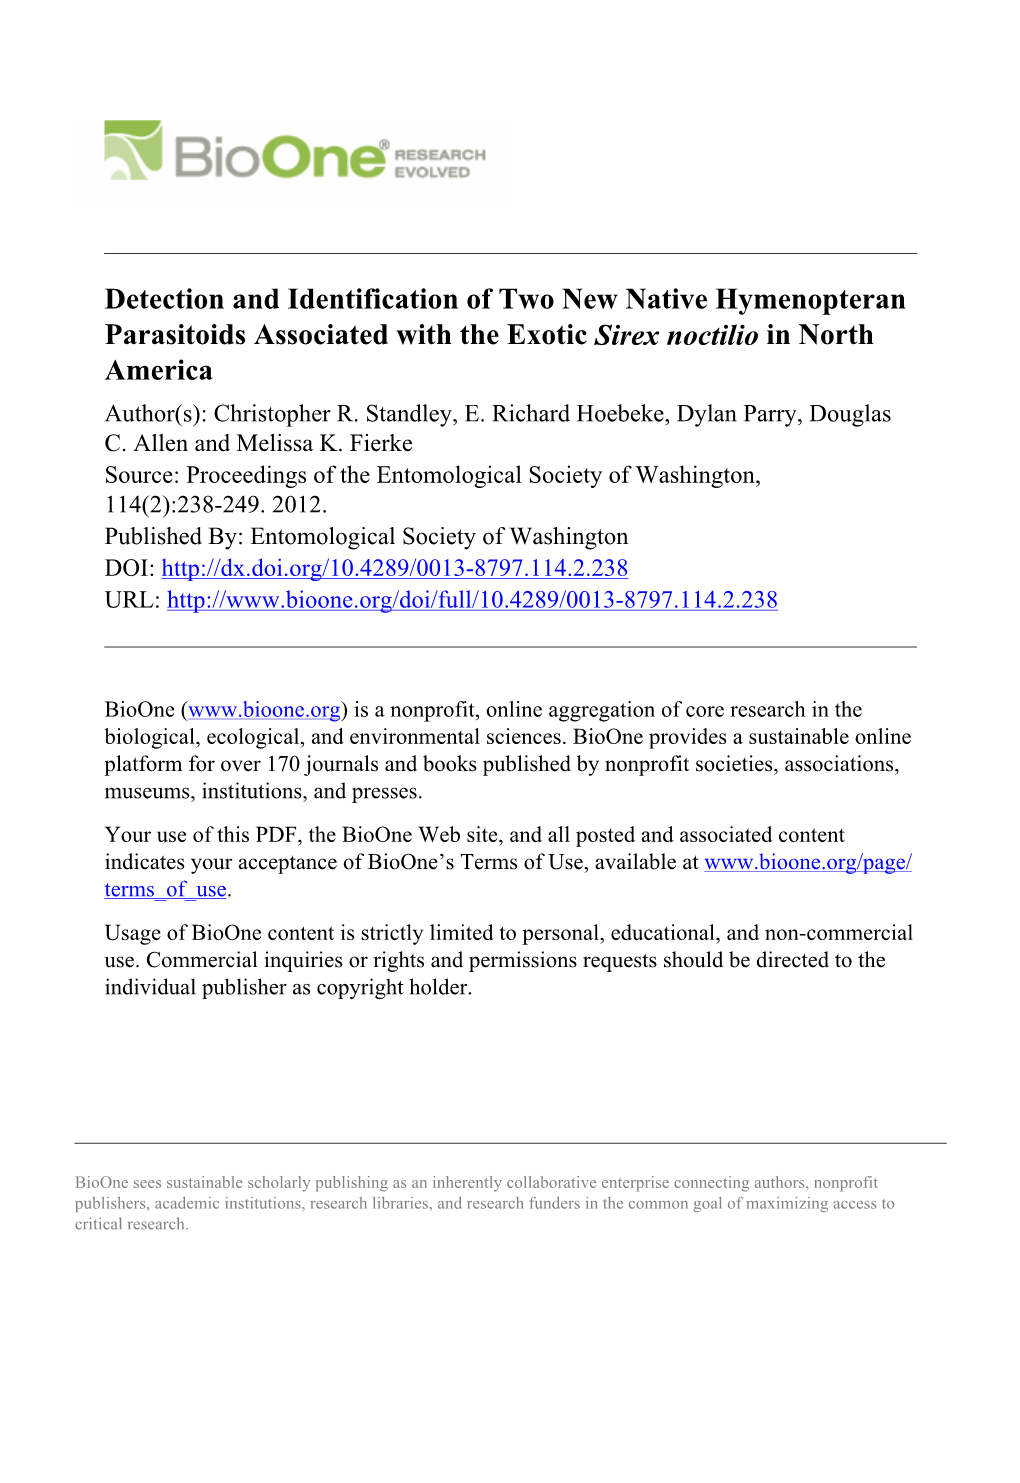 Detection and Identification of Two New Native Hymenopteran Parasitoids Associated with the Exotic Sirex Noctilio in North America Author(S): Christopher R